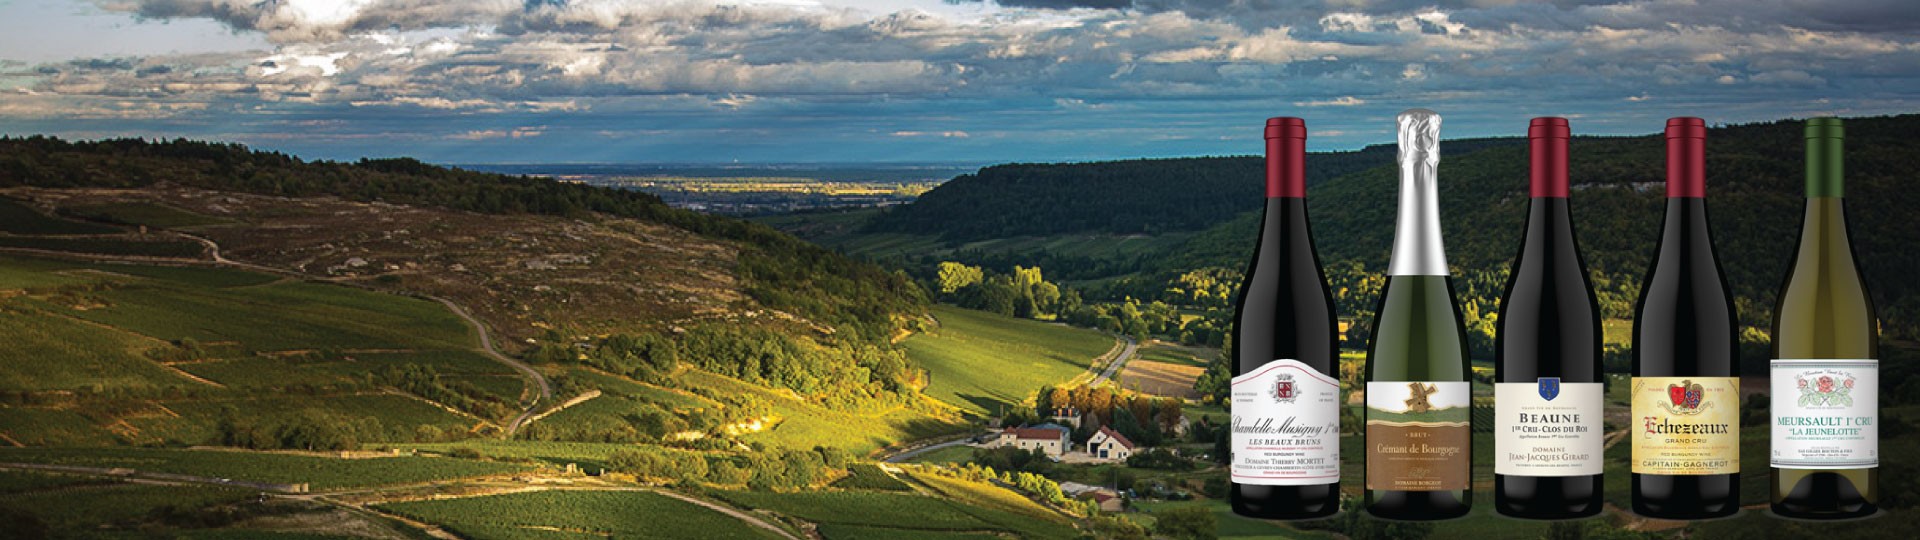 5 Burgundy wines are superimposed over a small winemaking village in Burgundy, France.